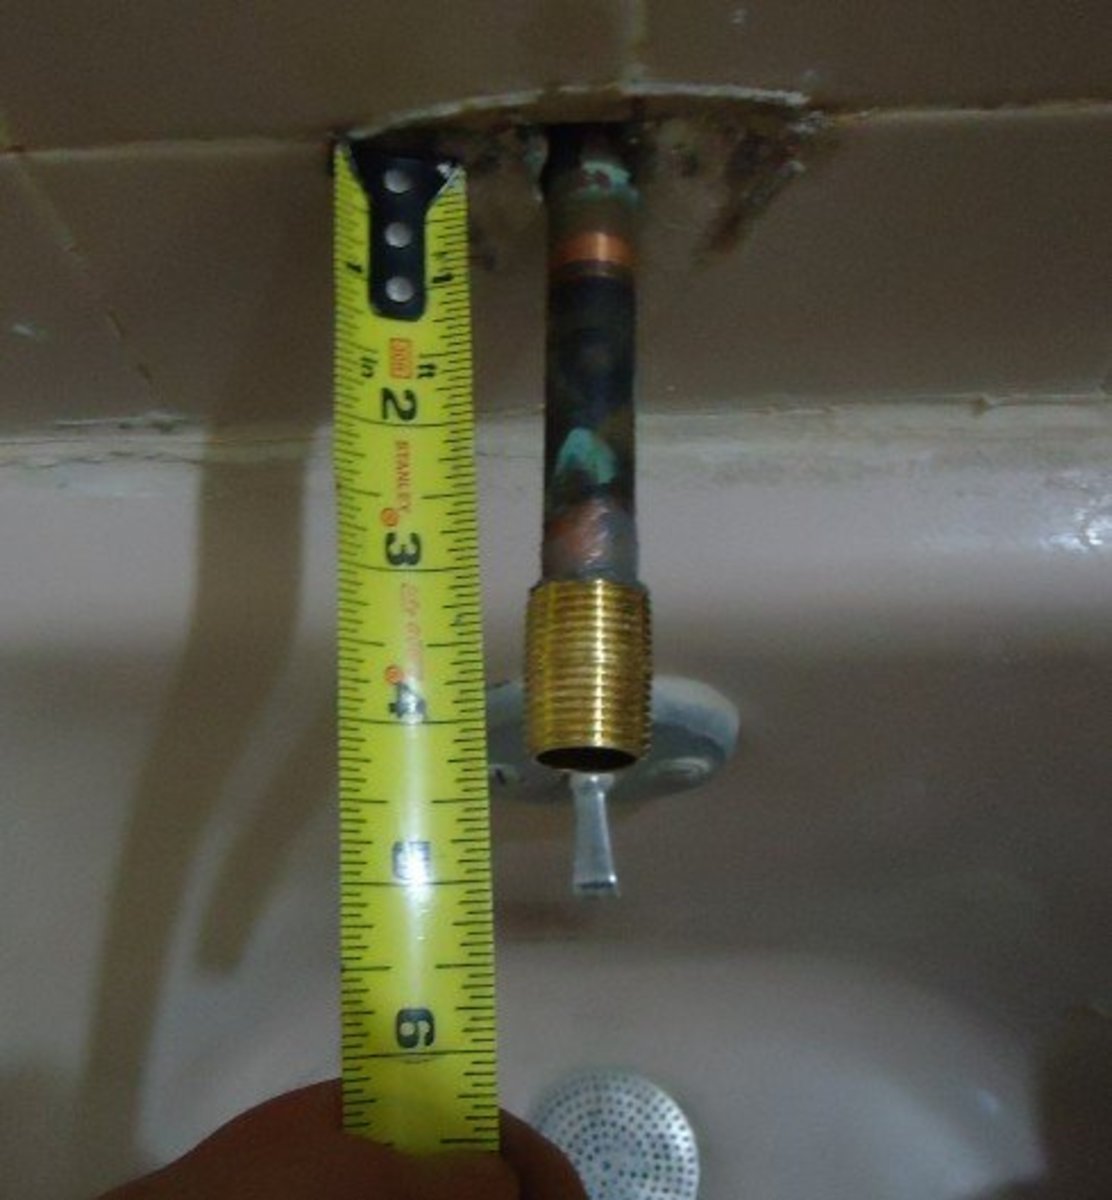 how-to-replace-a-single-handle-shower-valve